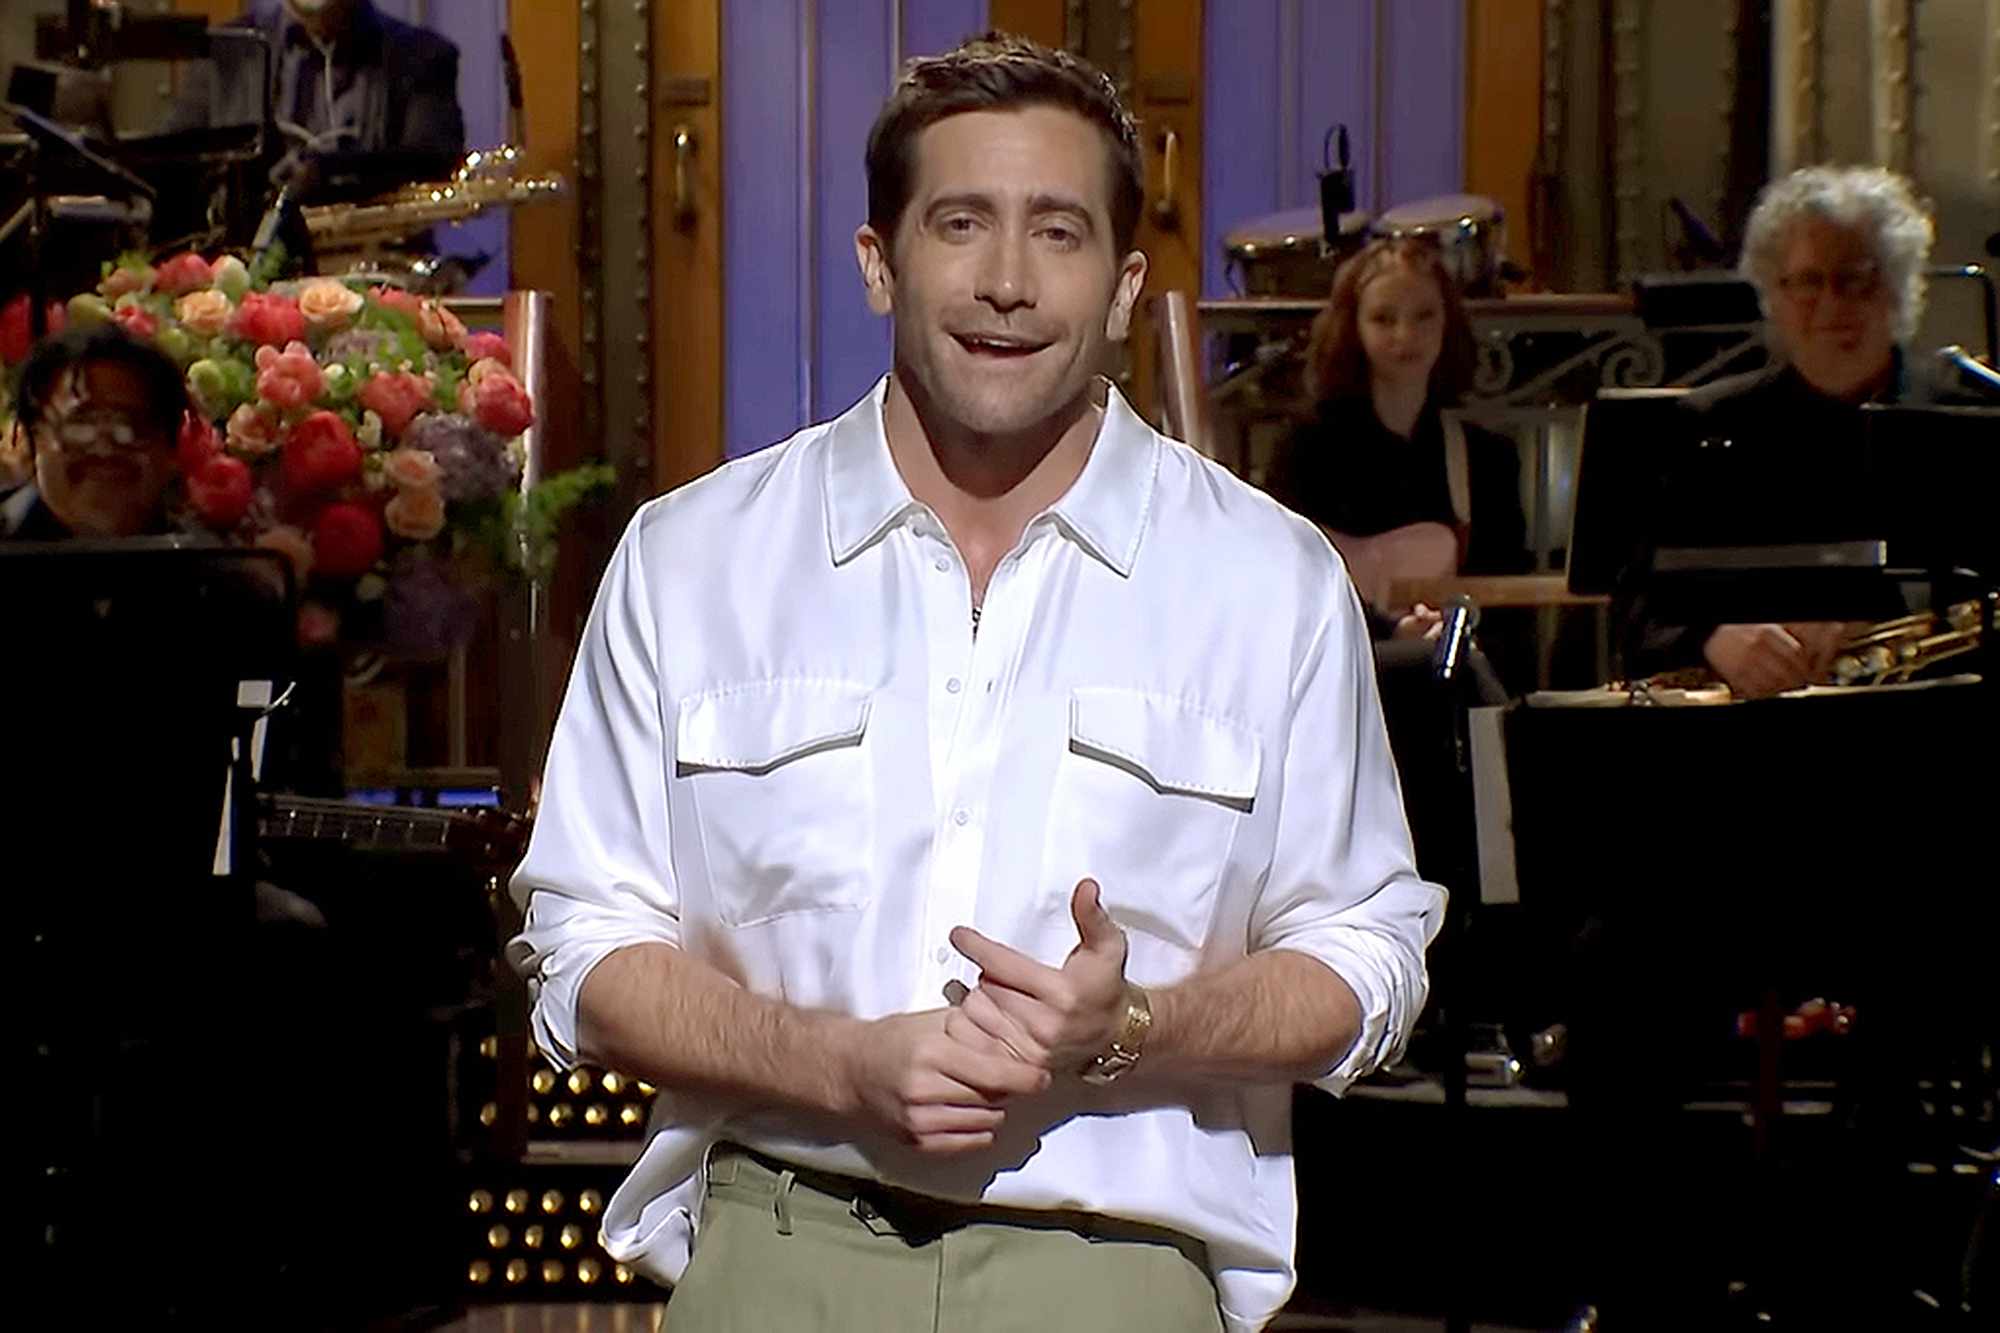 Jake Gyllenhaal Shows Off His Vocal Chops with Hilarious Boyz II Men Parody During “SNL” Hosting Gig